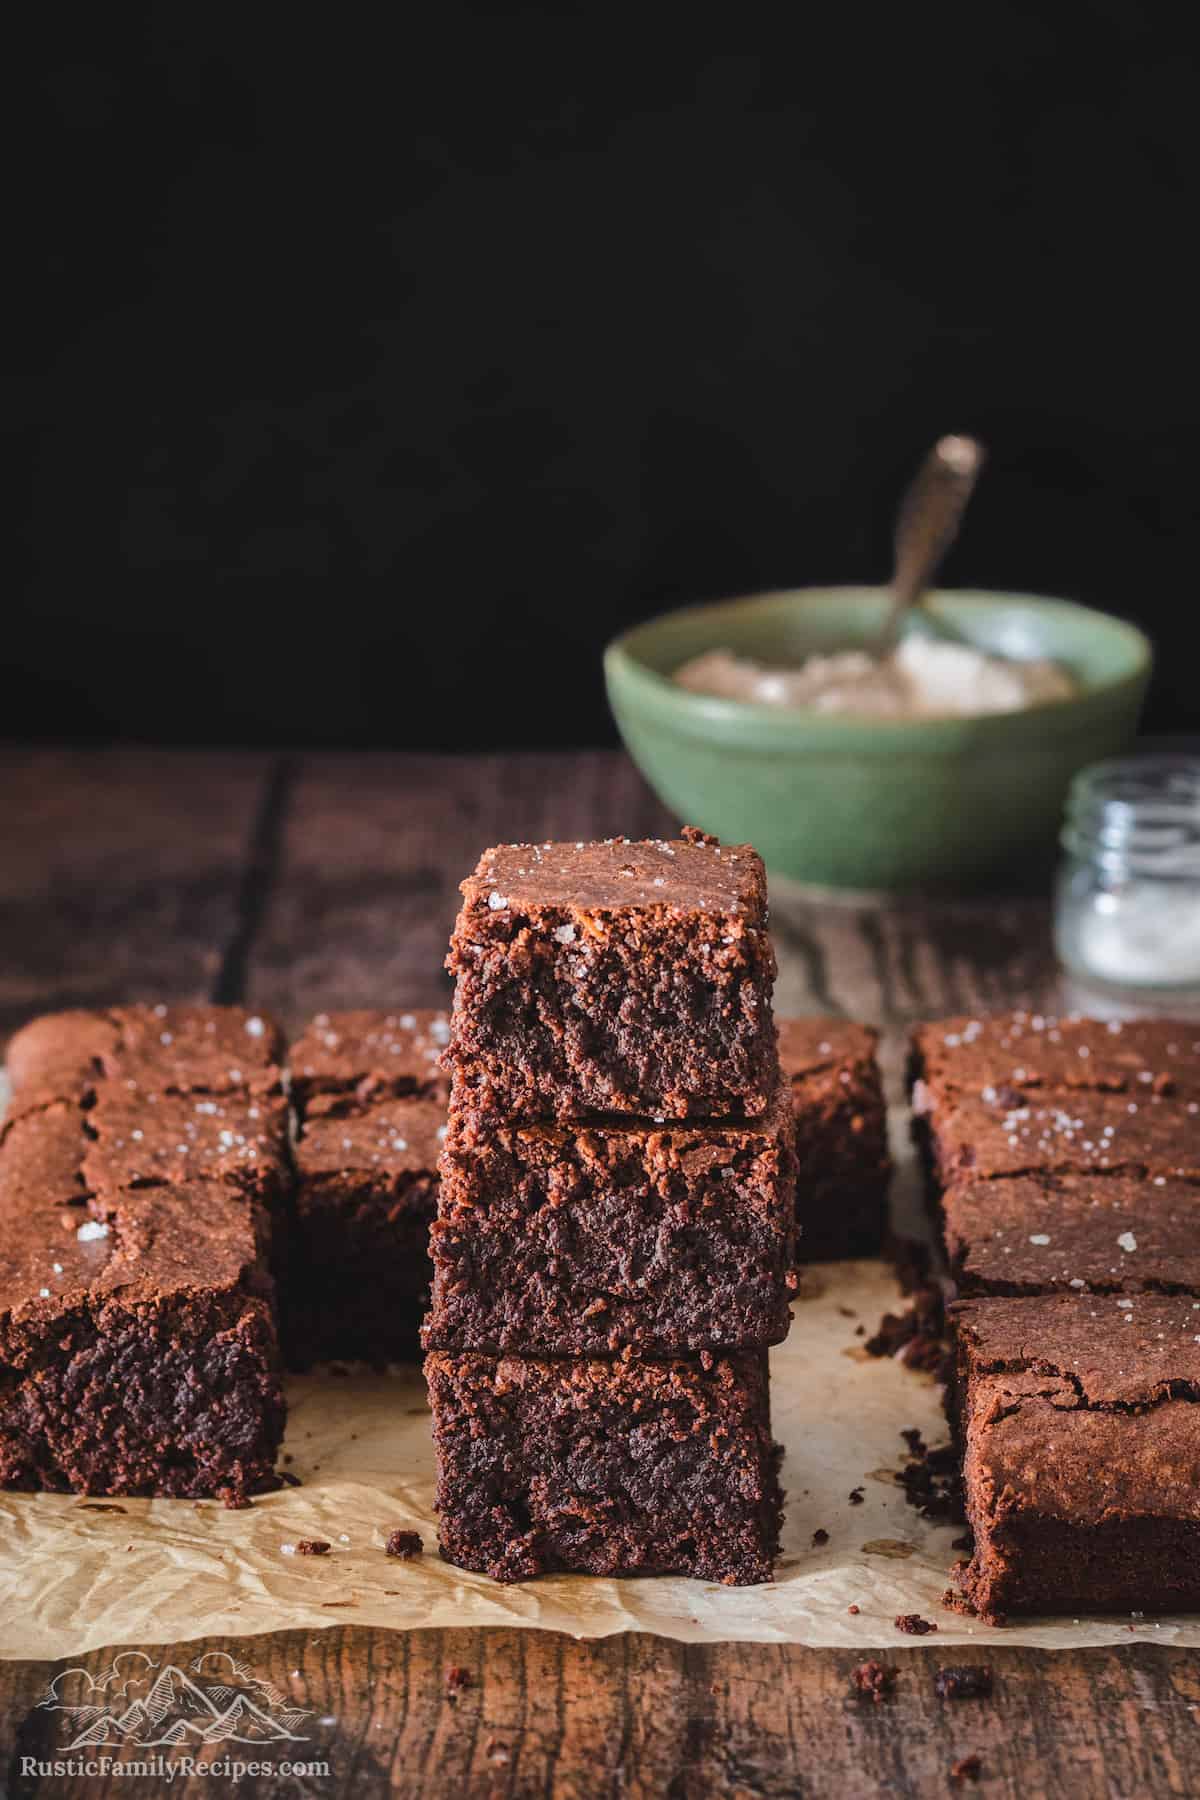 Stacks of rich homemade brownies.